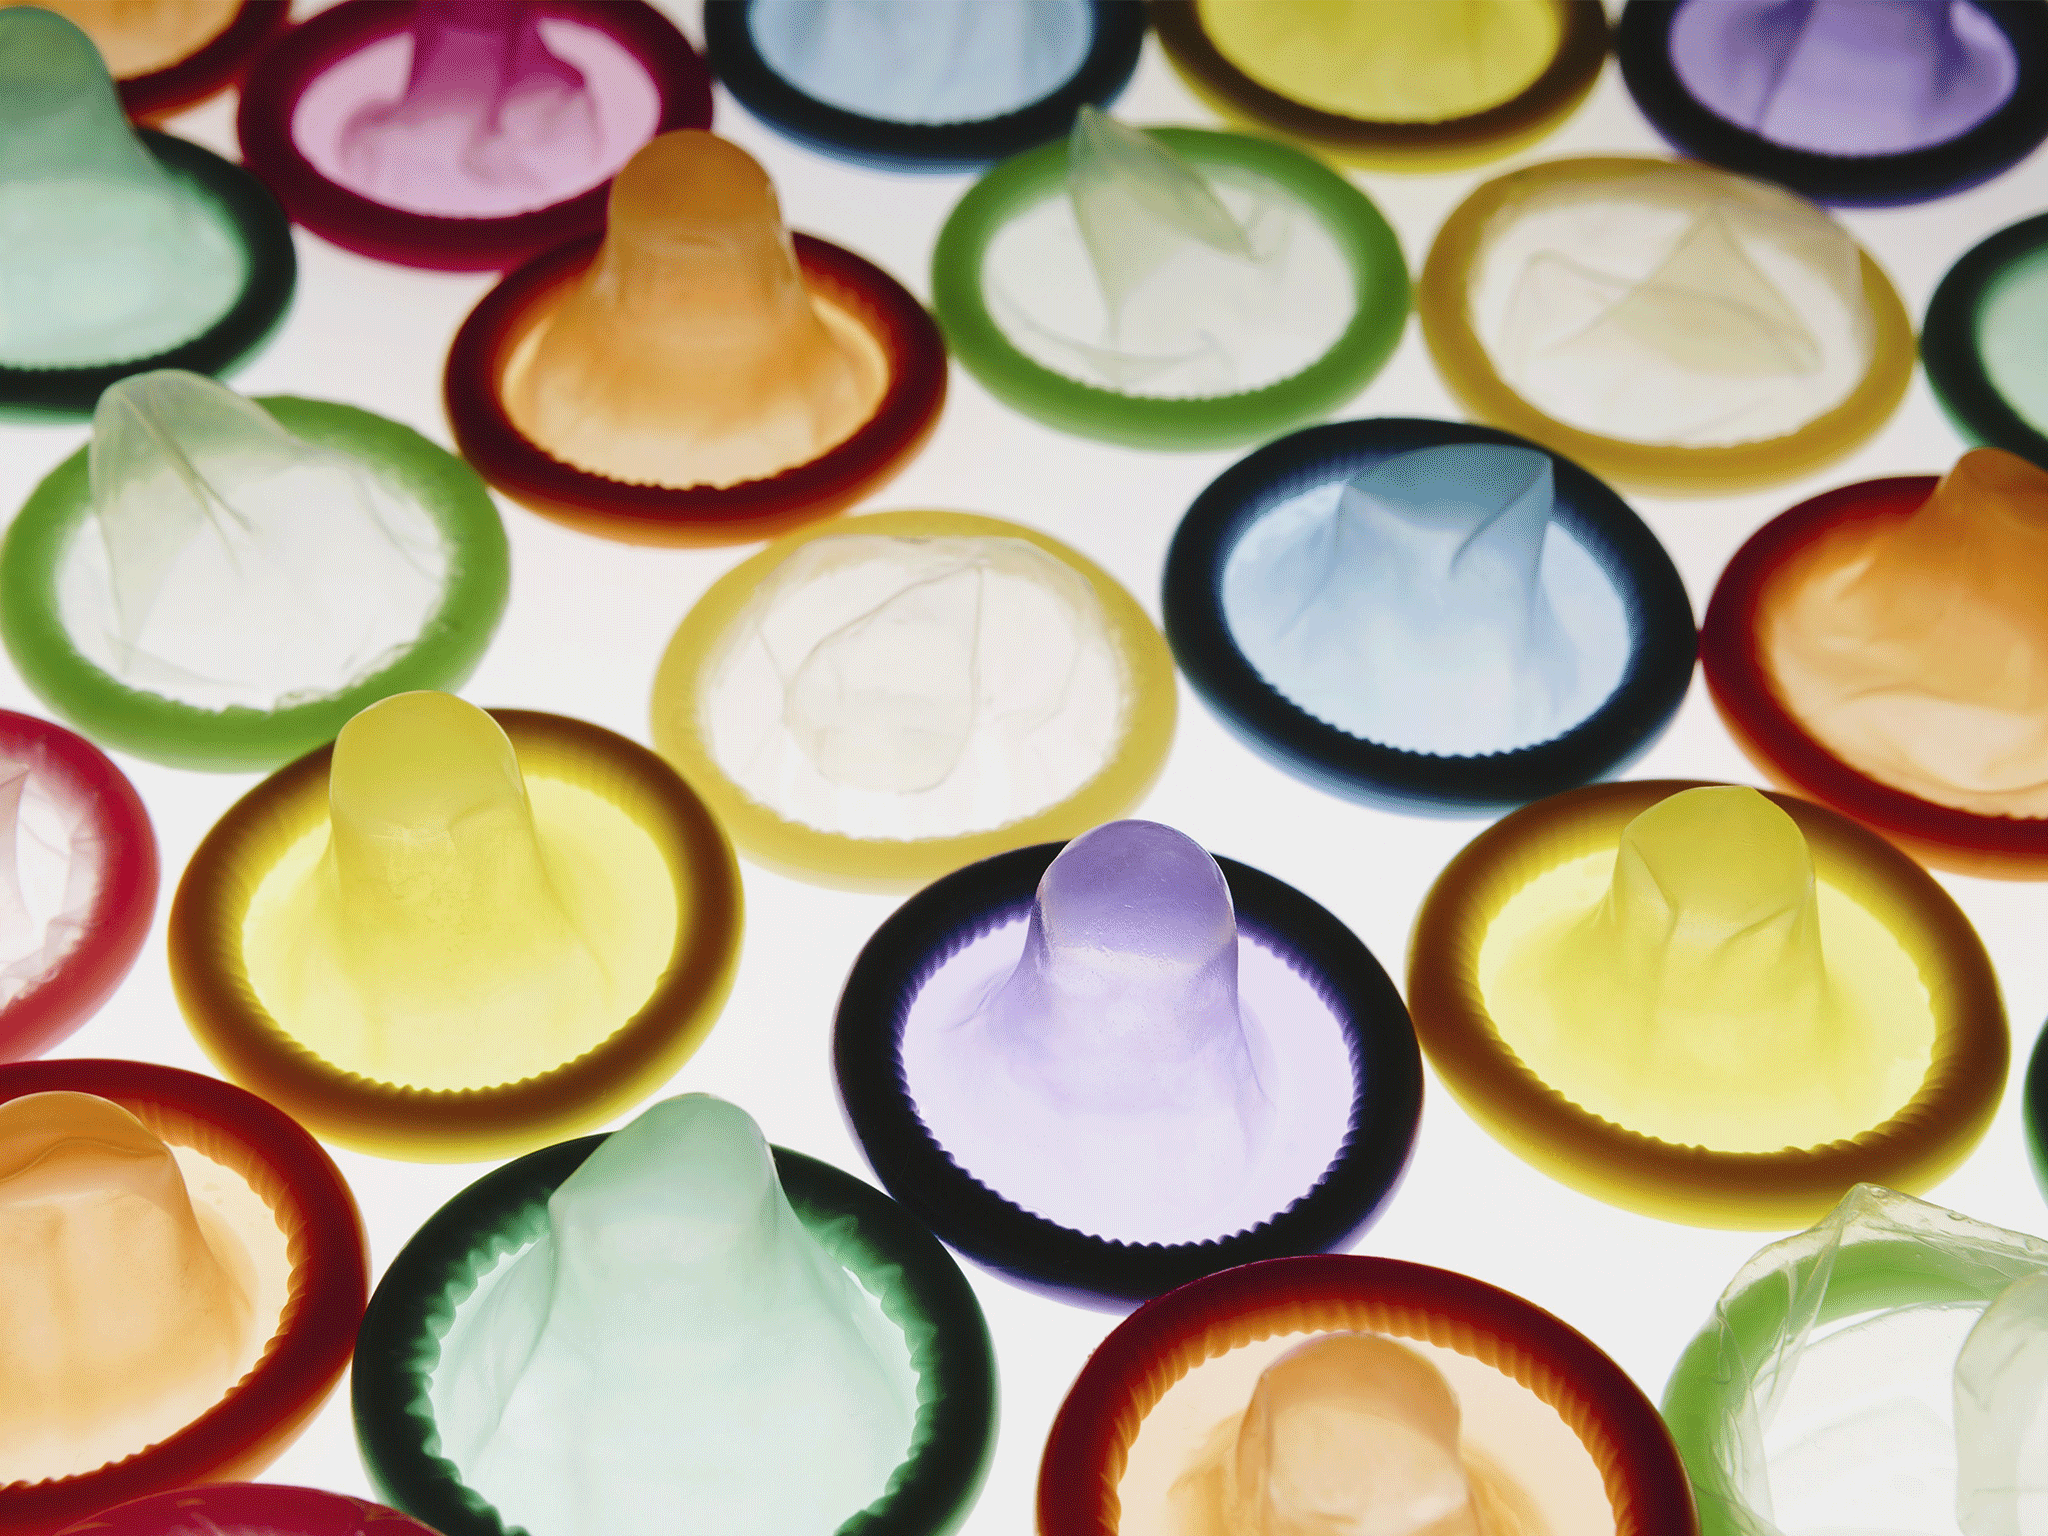 One in ten young adults surveyed by YouGov said they had never used a condom